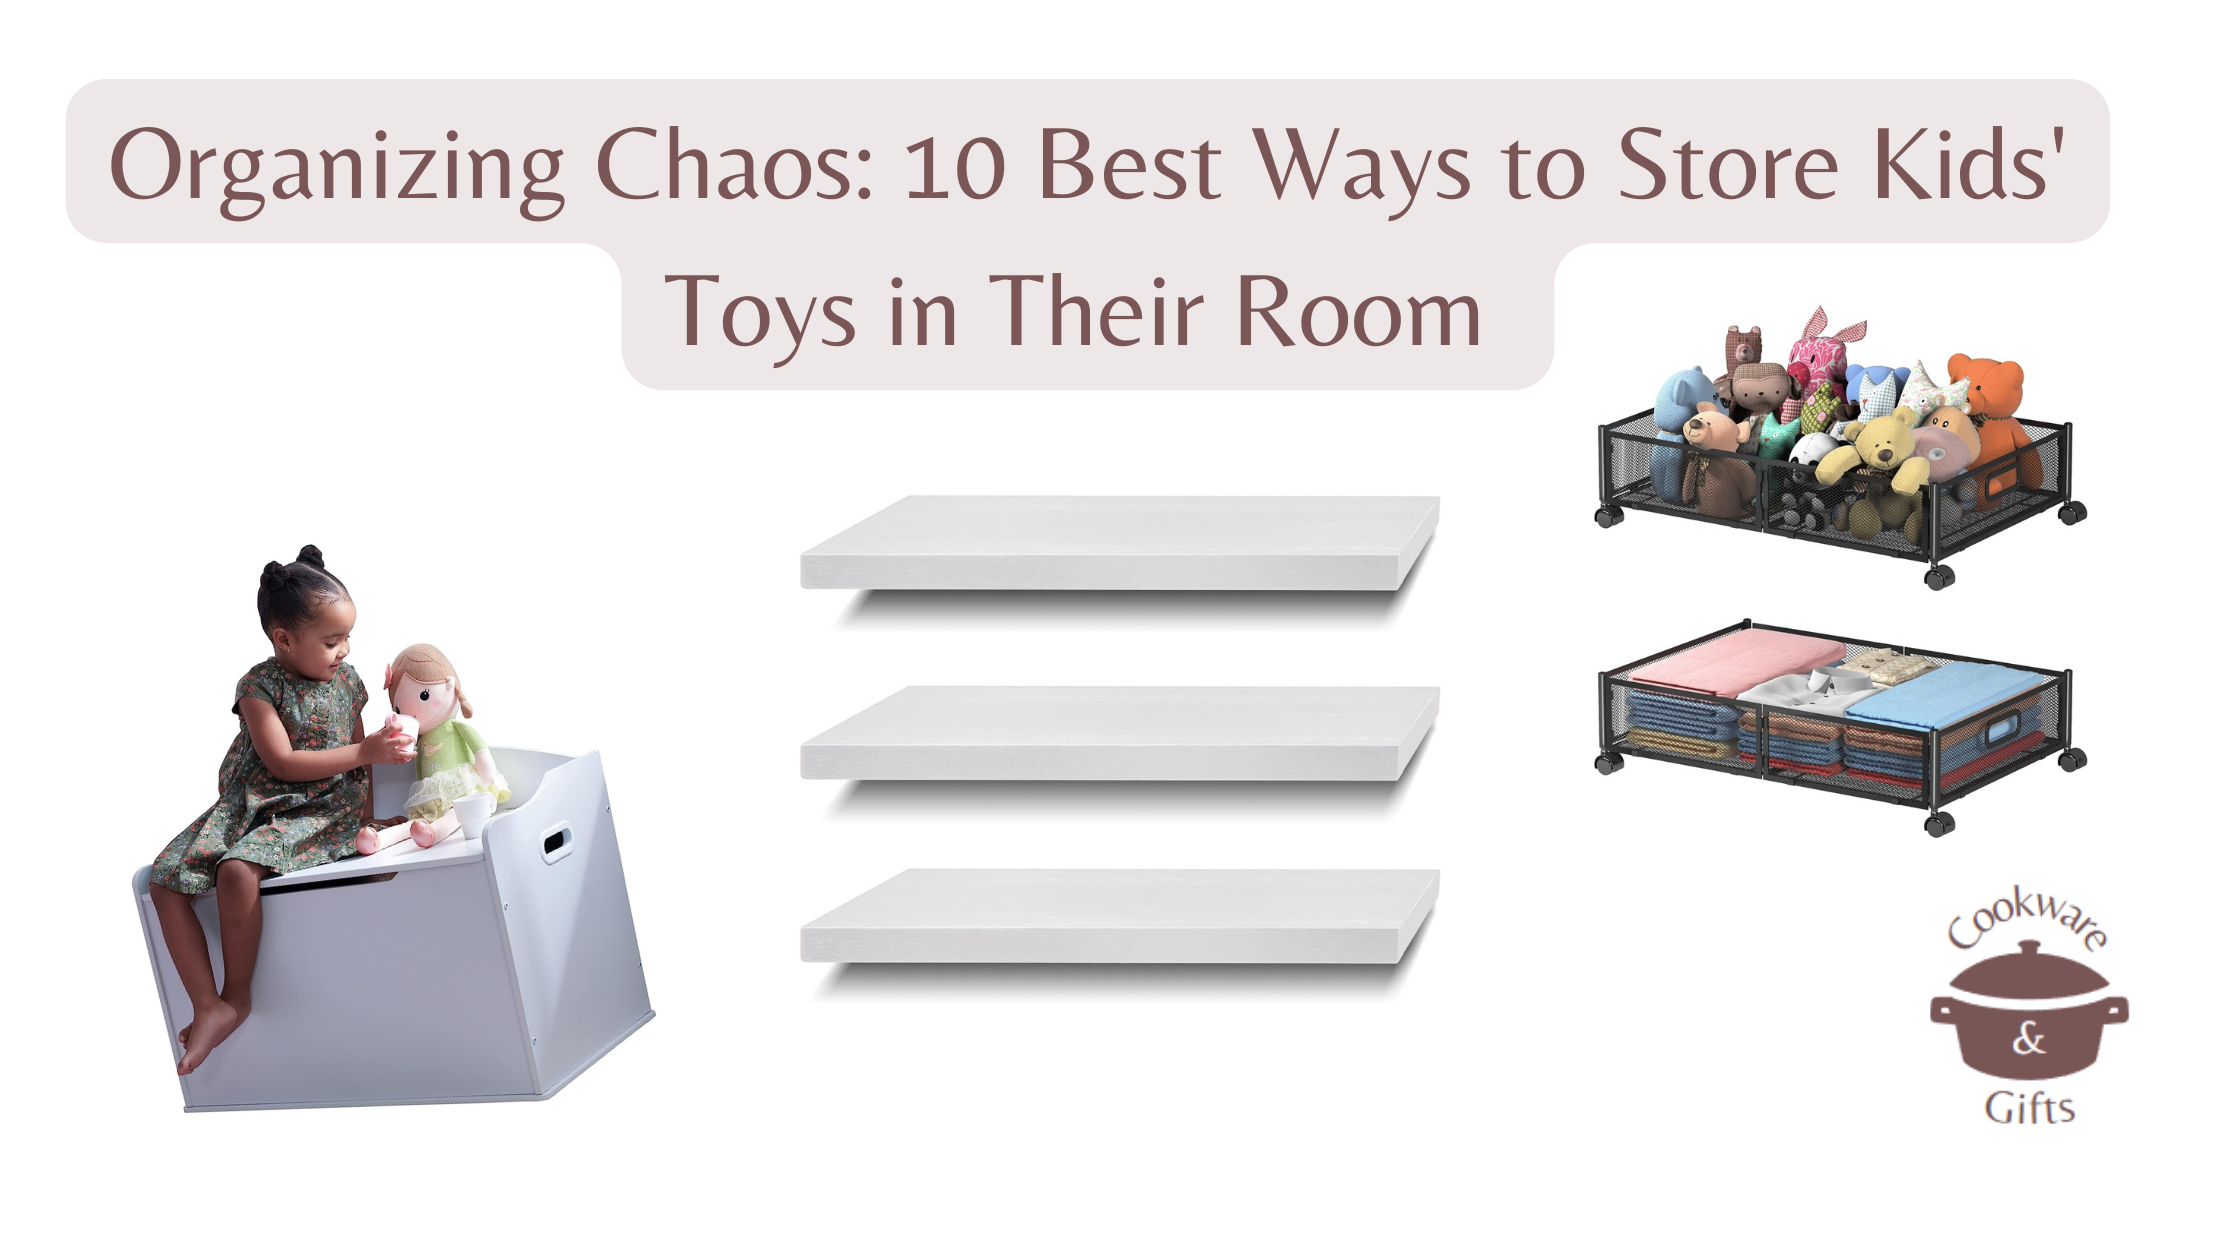 Organizing Chaos: 10 Best Ways to Store Kids’ Toys in Their Room